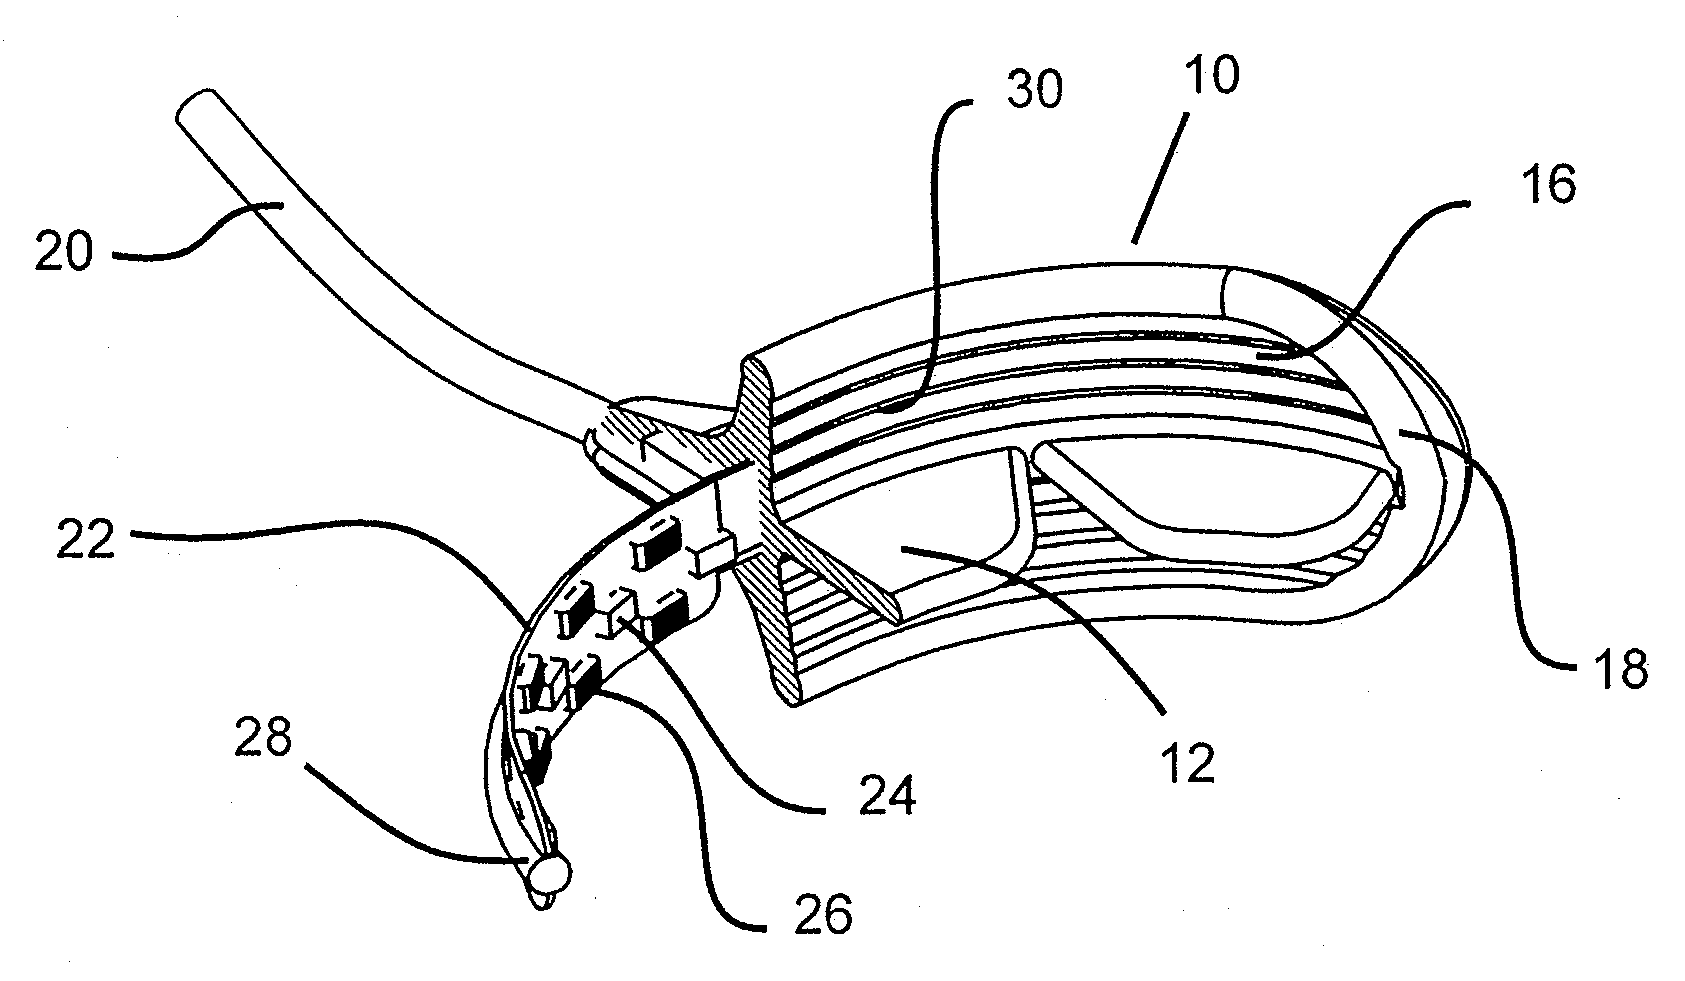 Mouthpiece that adjusts to user arch sizes and seals from oxygen exposure and methods for effecting an oral treatment